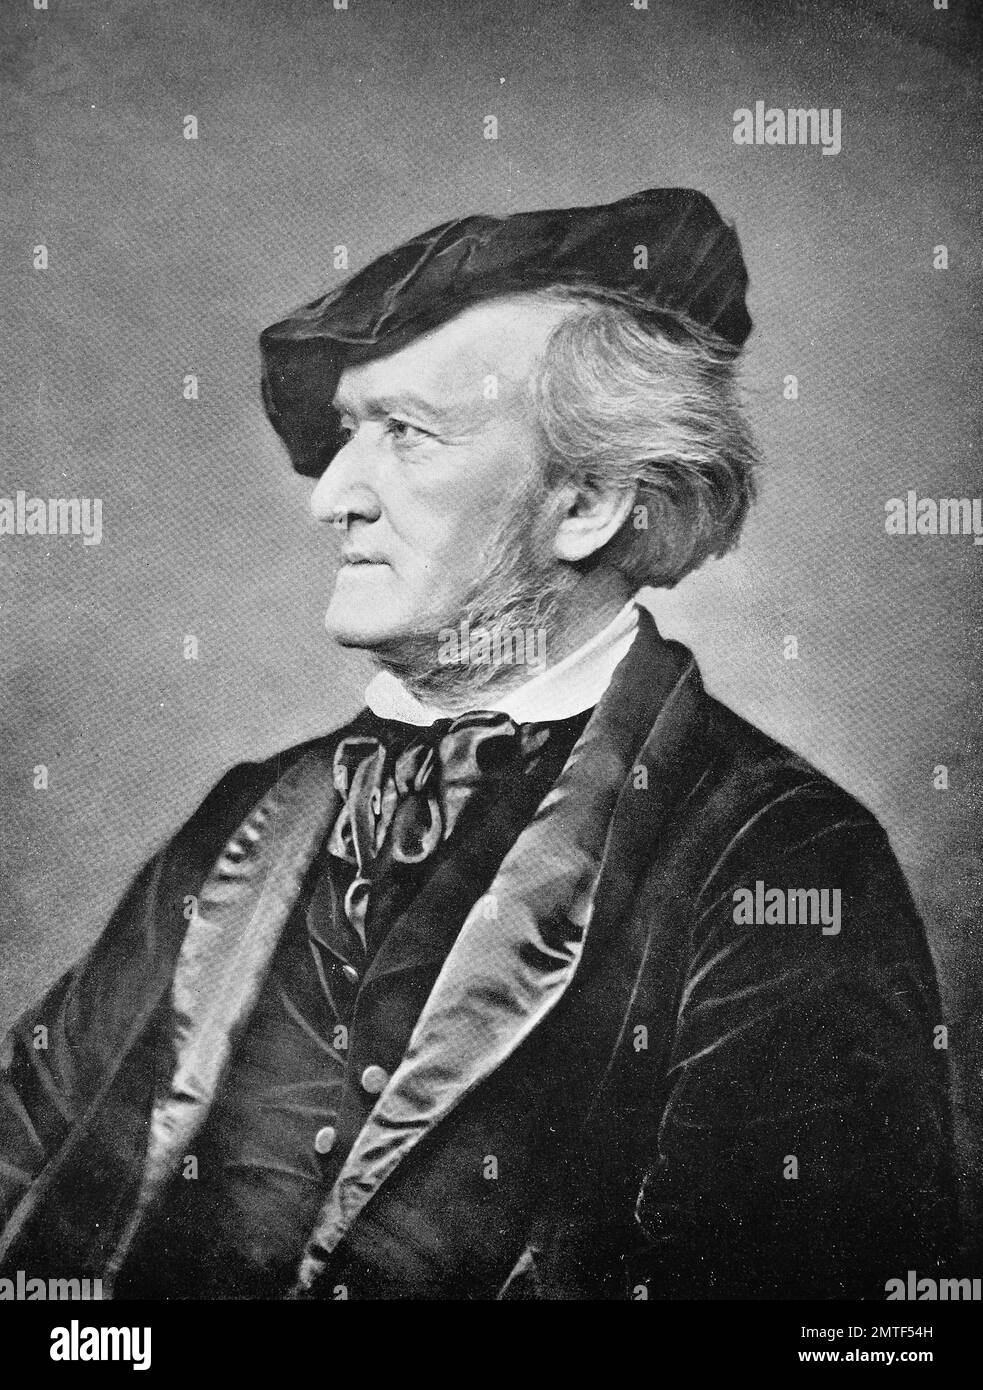 Wilhelm Richard Wagner was a German composer, theatre director, polemicist, and conductor who is primarily known for his operas Stock Photo